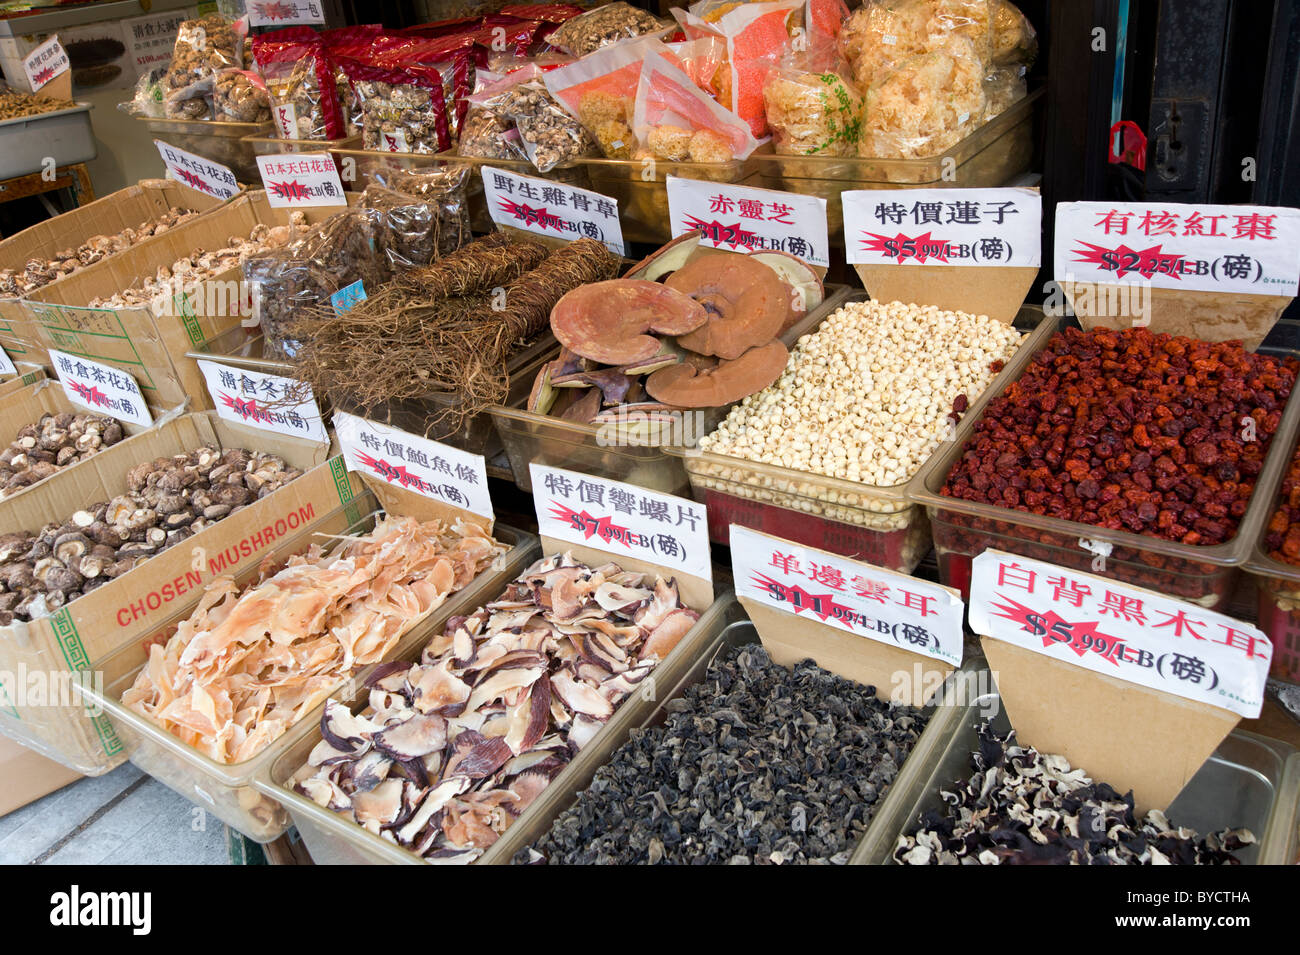 Chinese ingredients outside a food shop in Chinatown, New York City, USA Stock Photo